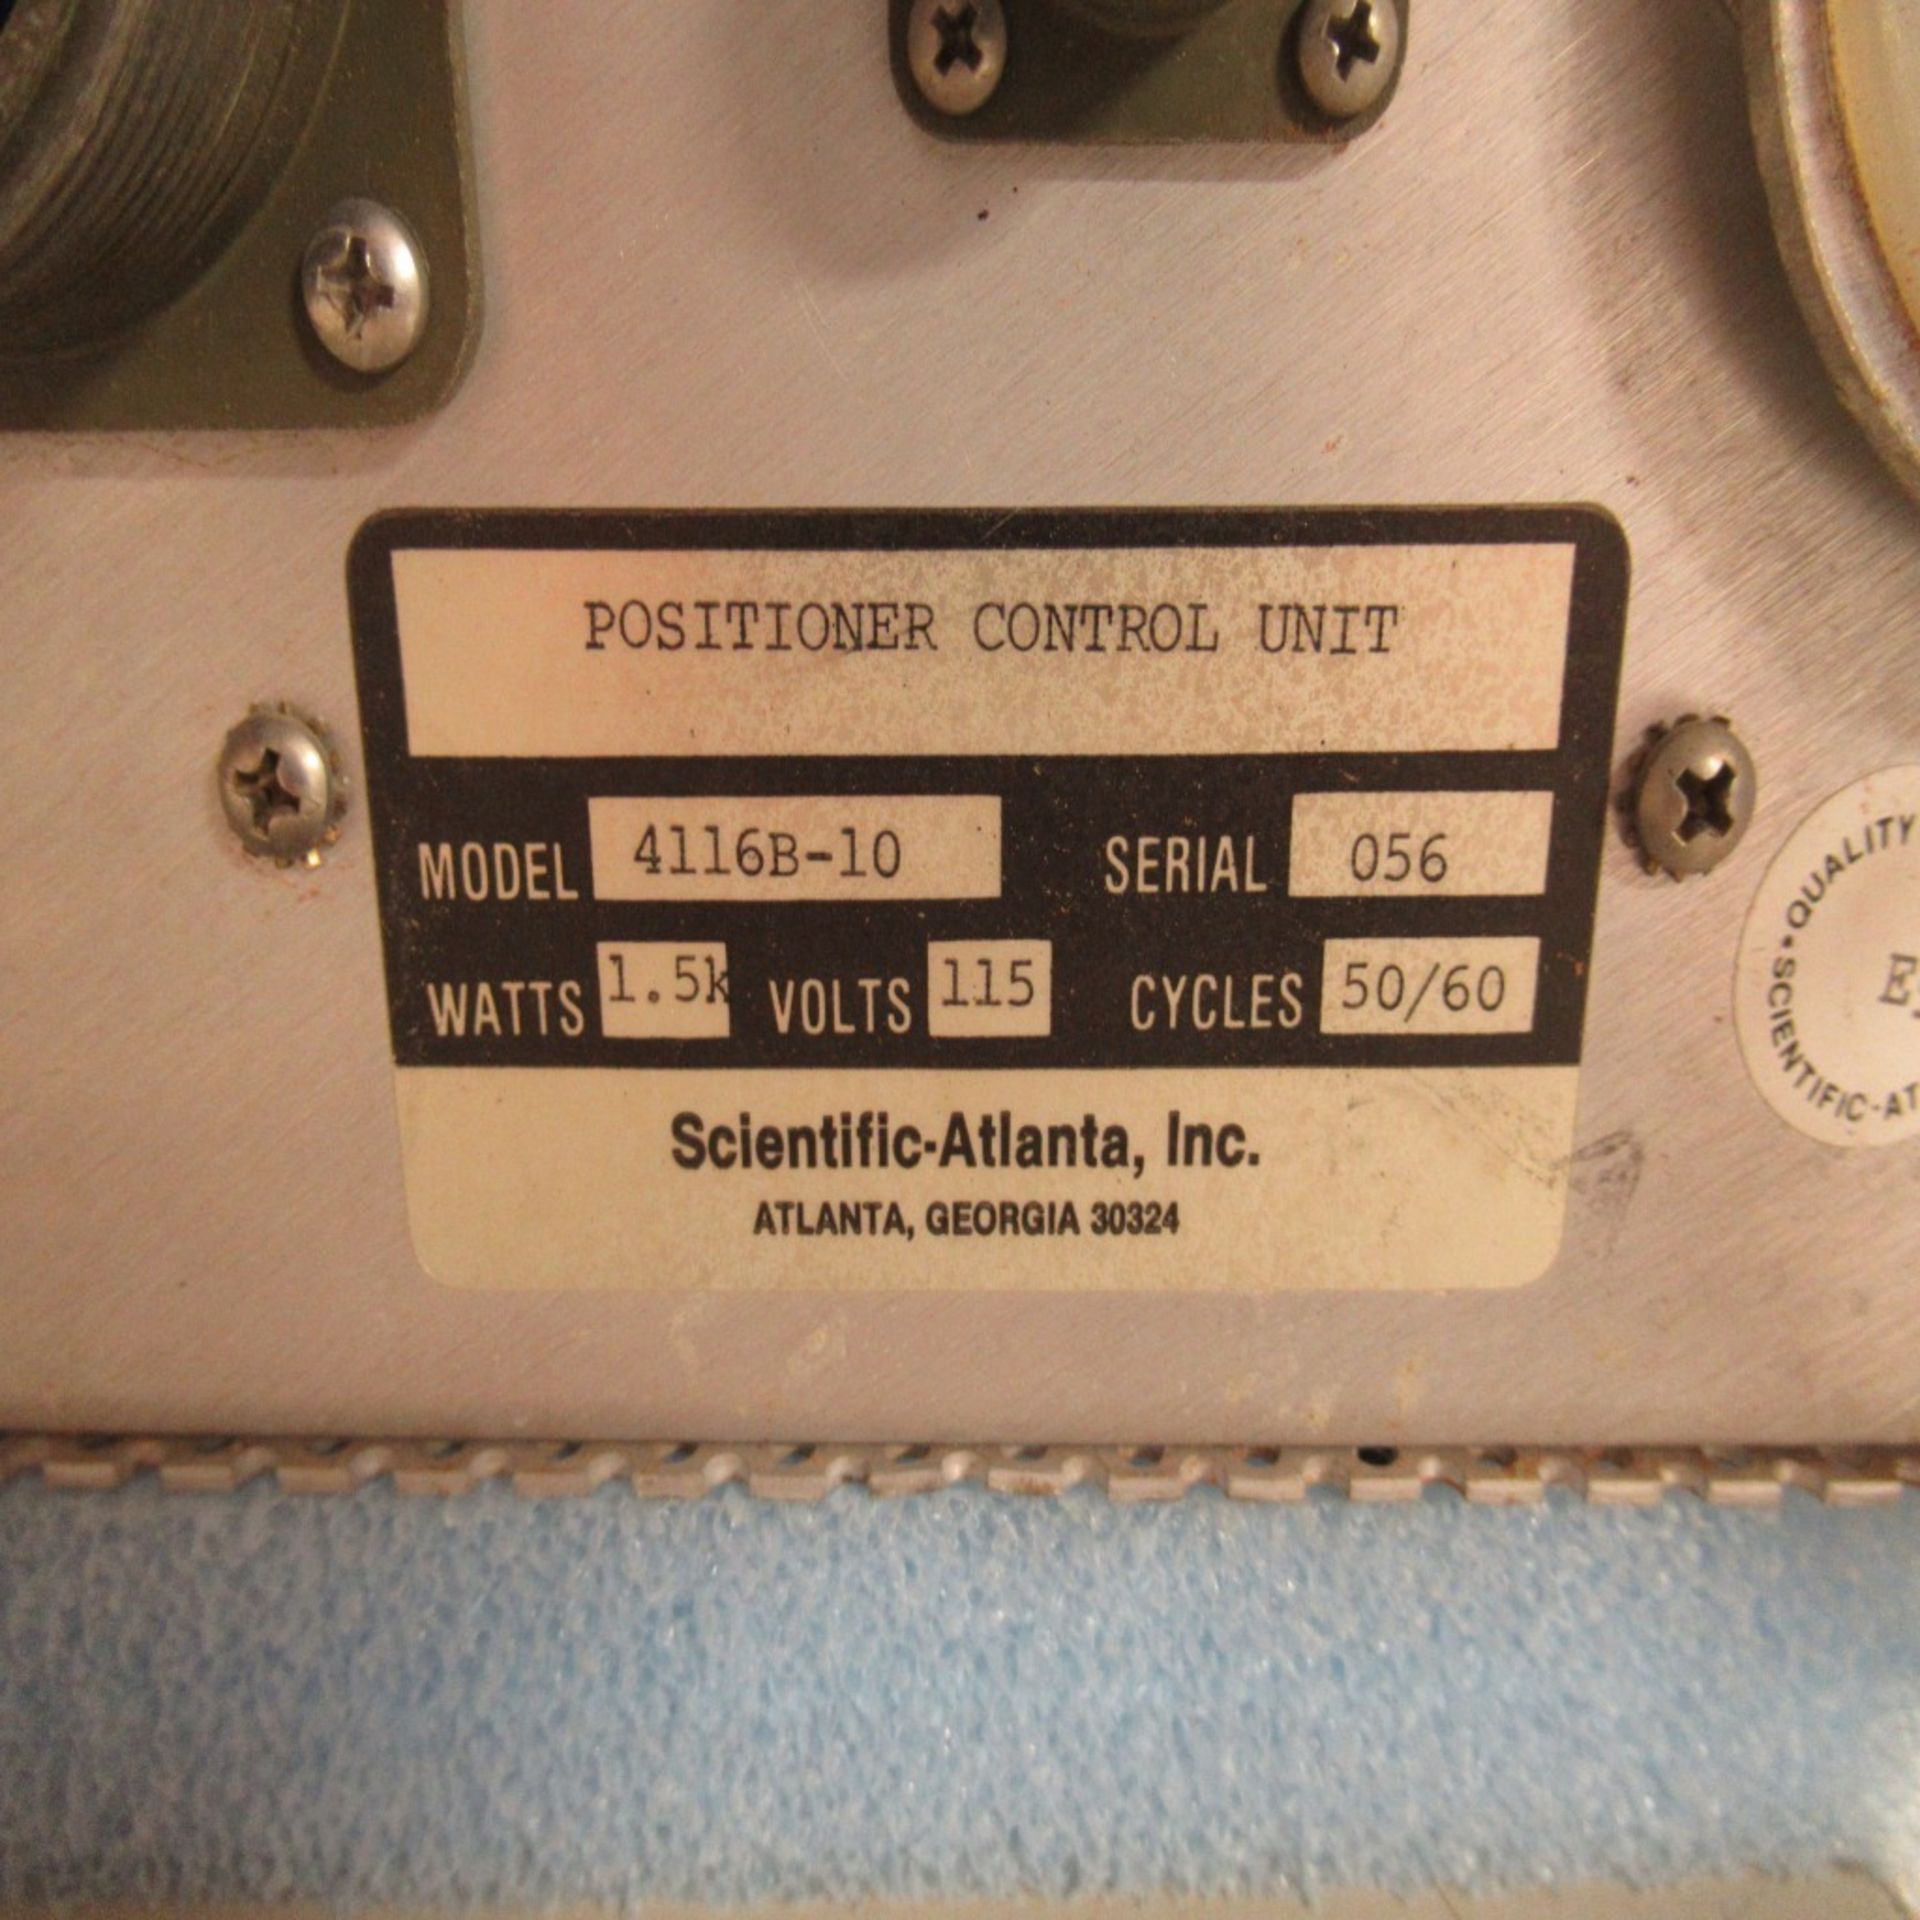 PHOTON SNAP SHOT MODEL 6000 *POWERS ON* NO SCREEN DISPLAY; FARNELL AP20-80 REGULATED POWER SUPPLY * - Image 93 of 222